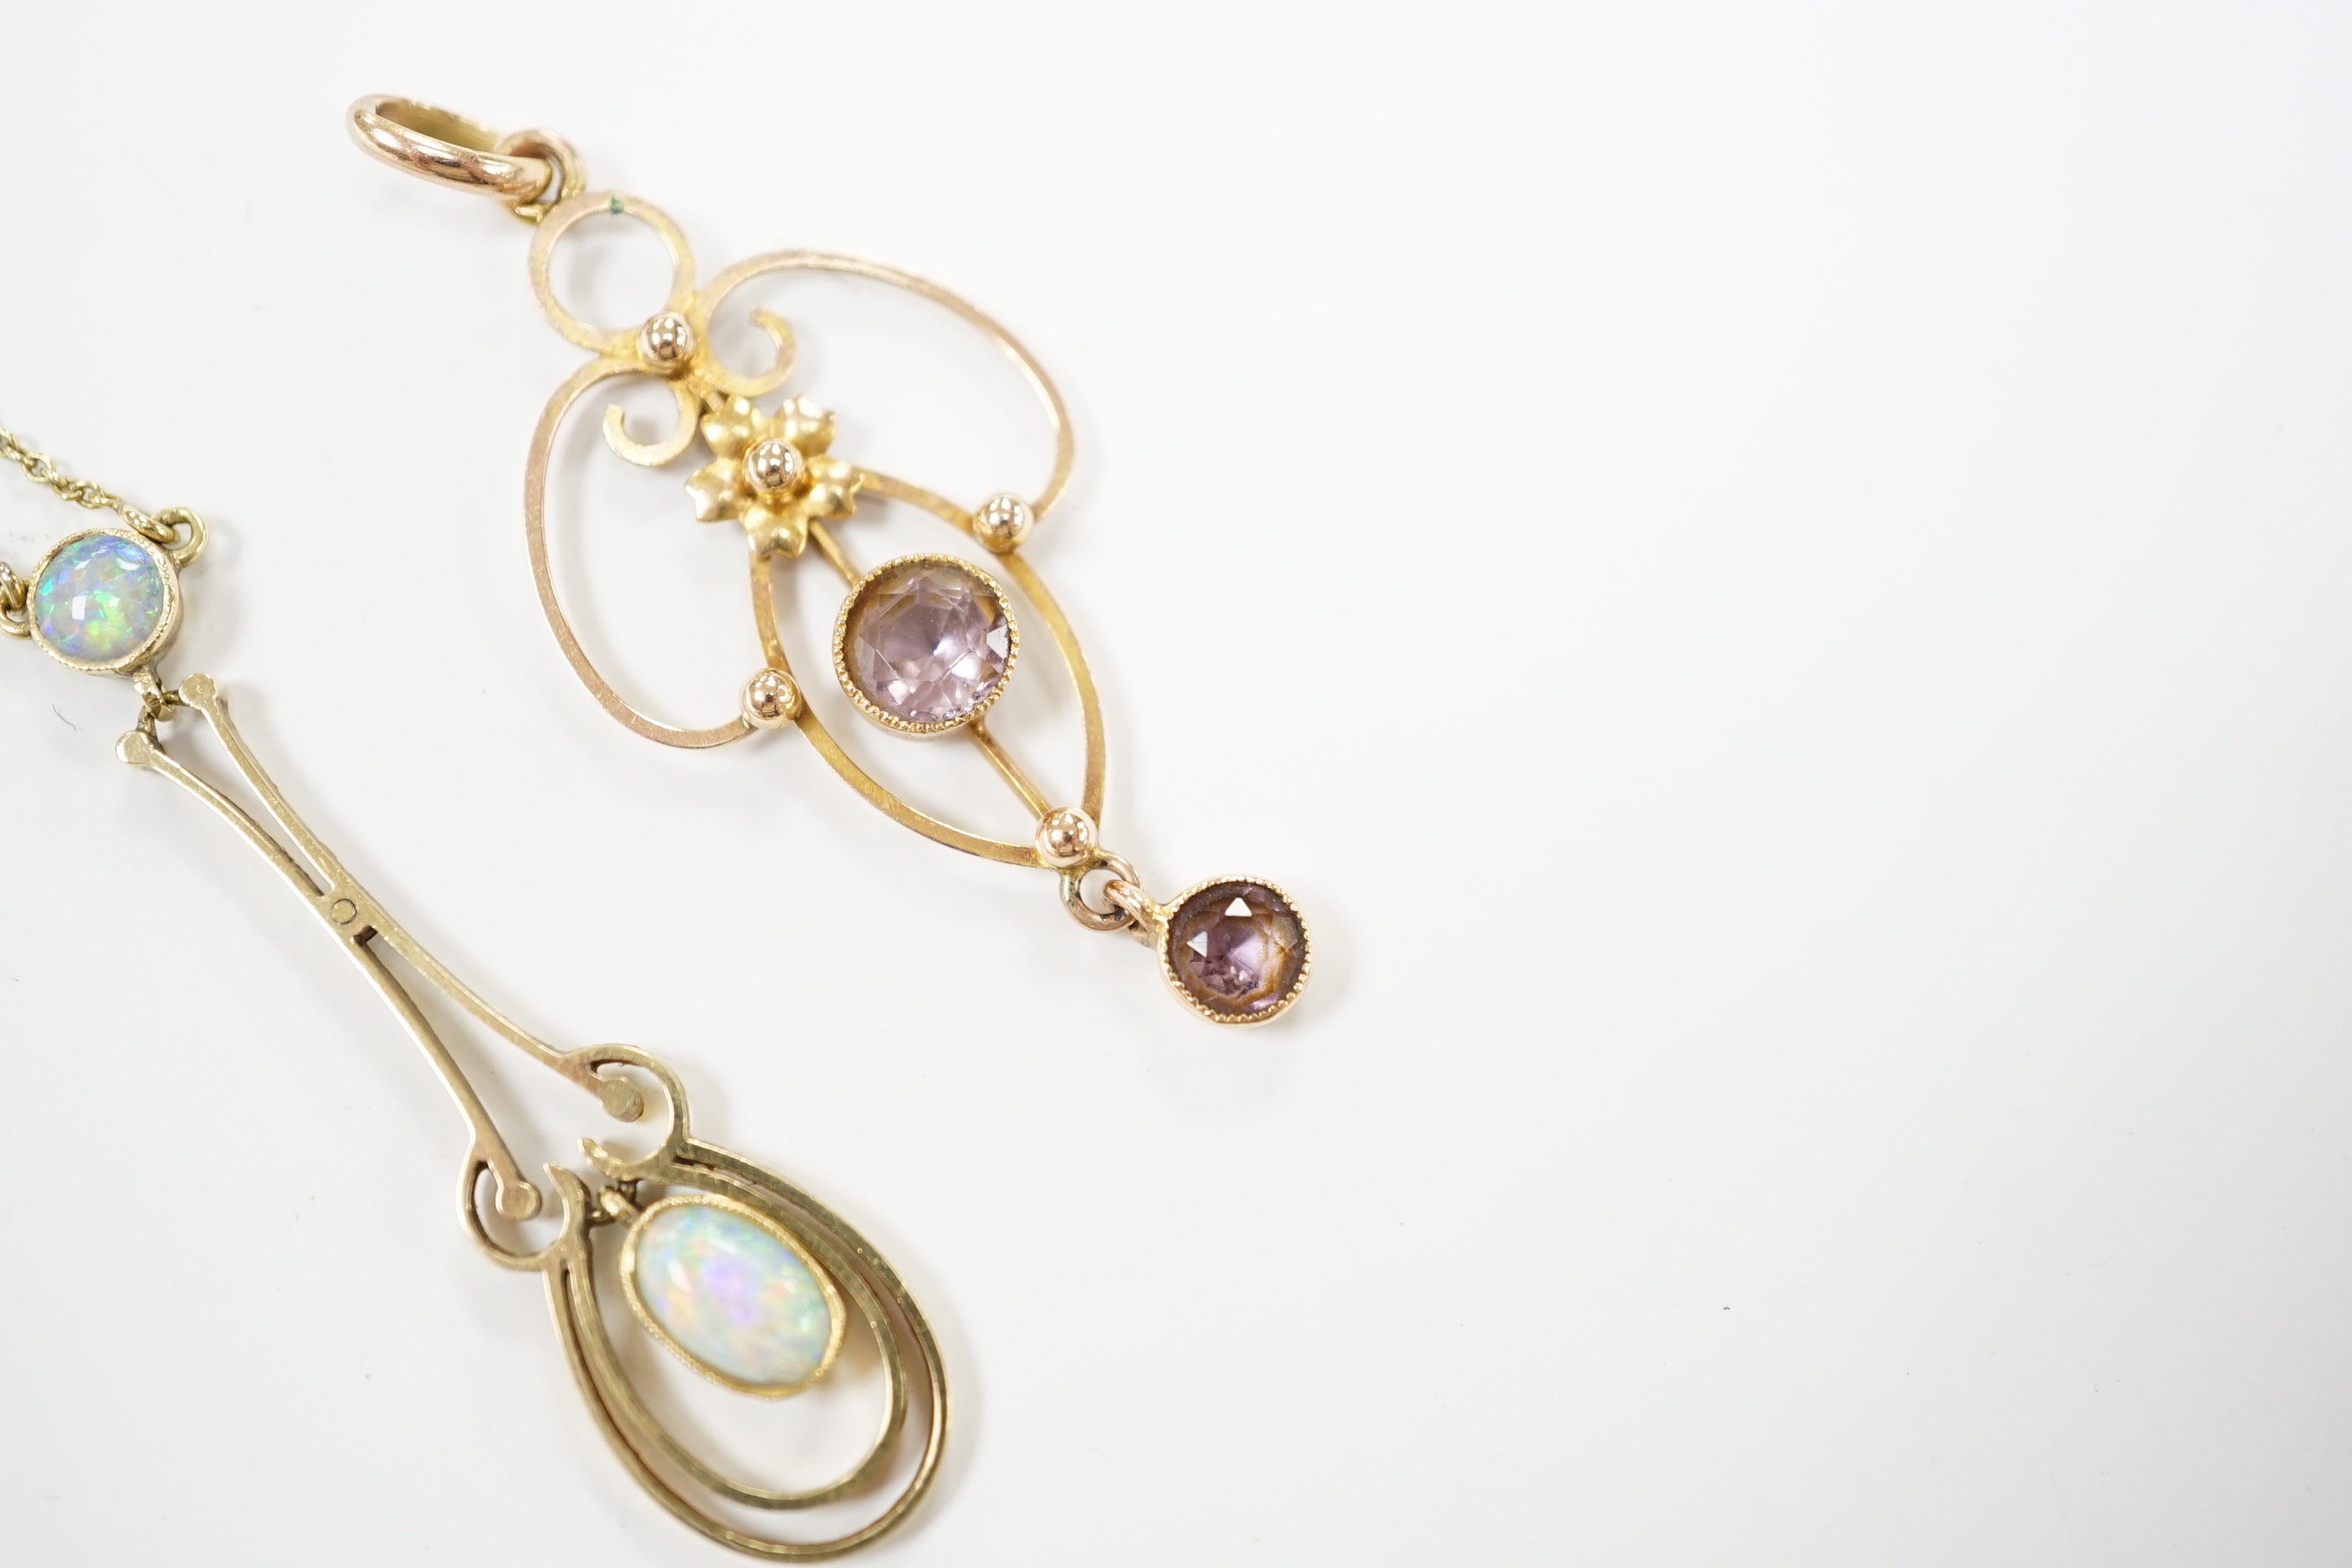 An Edwardian 15ct and two stone white opal set drop pendant necklace, chain unmarked, overall 46cm, and one other Edwardian 9ct and gem set pendant, 40mm.